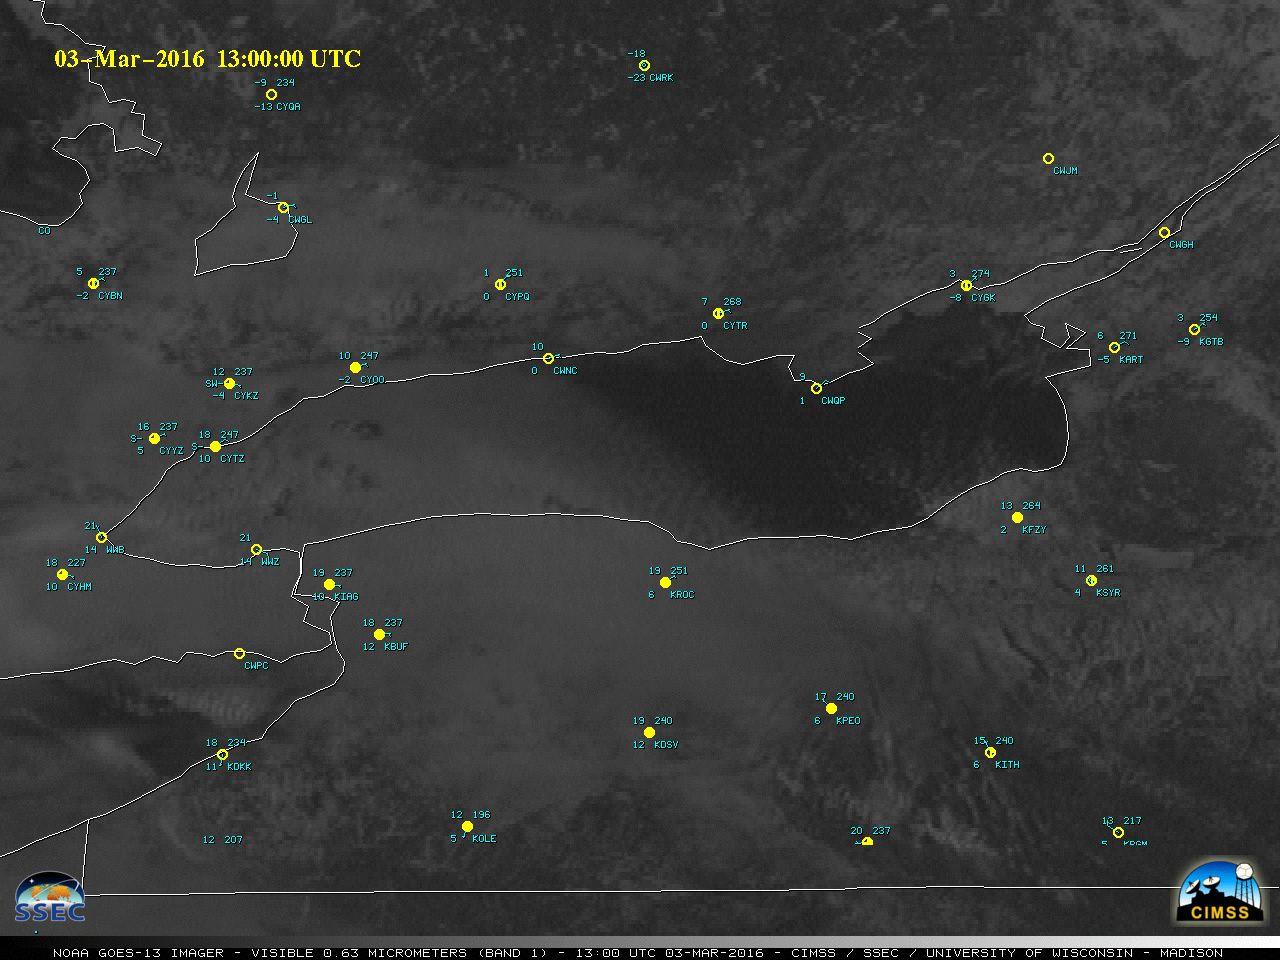 GOES-13 Visible (0.63 µm) images, centered over Lake Ontario [click to play animation]